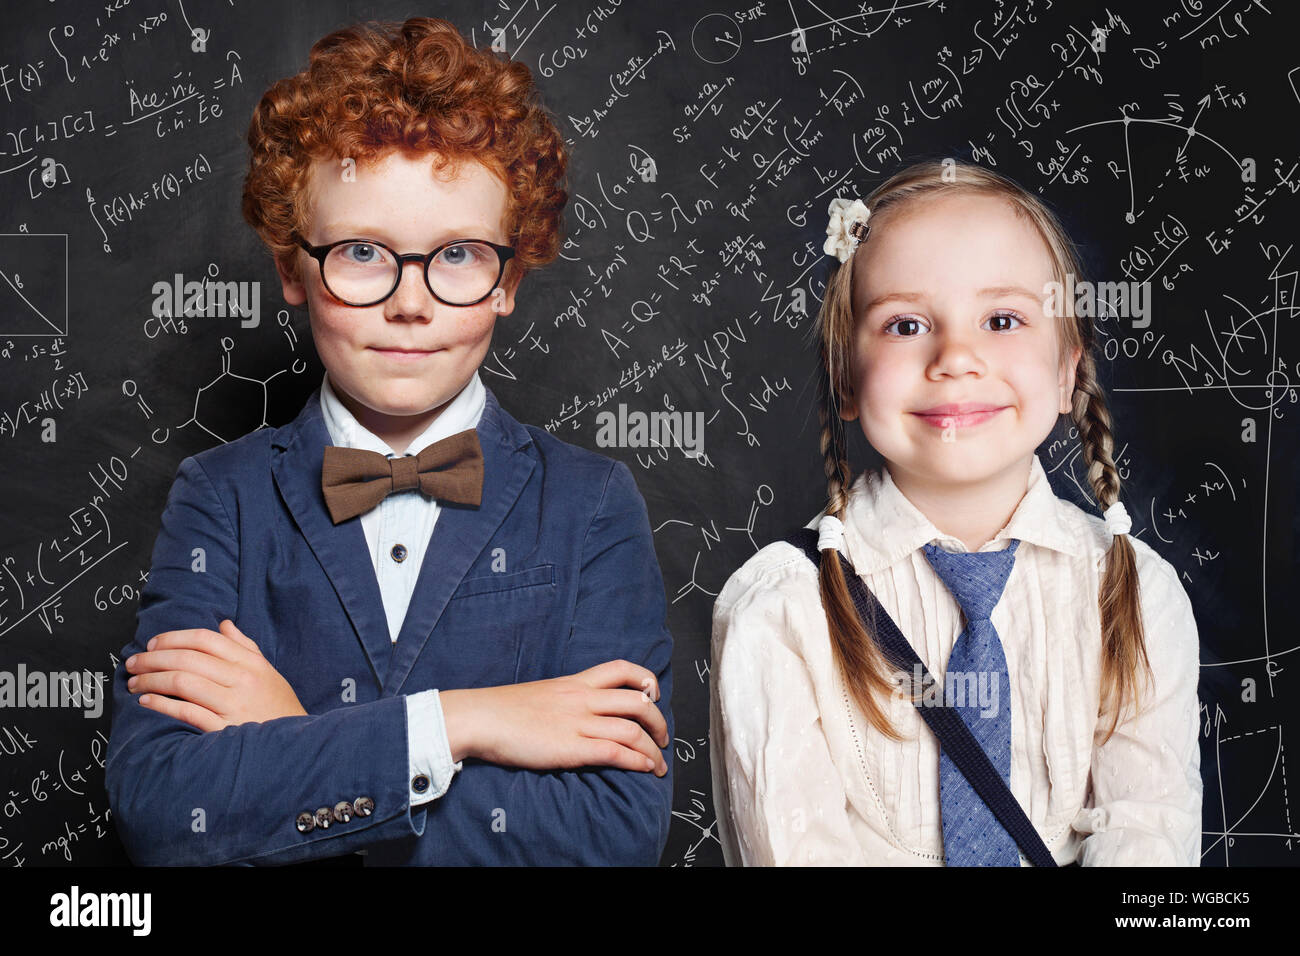 Cute school kids portrait. Little girl and boy school student on blackboard background with science and maths formulas Stock Photo